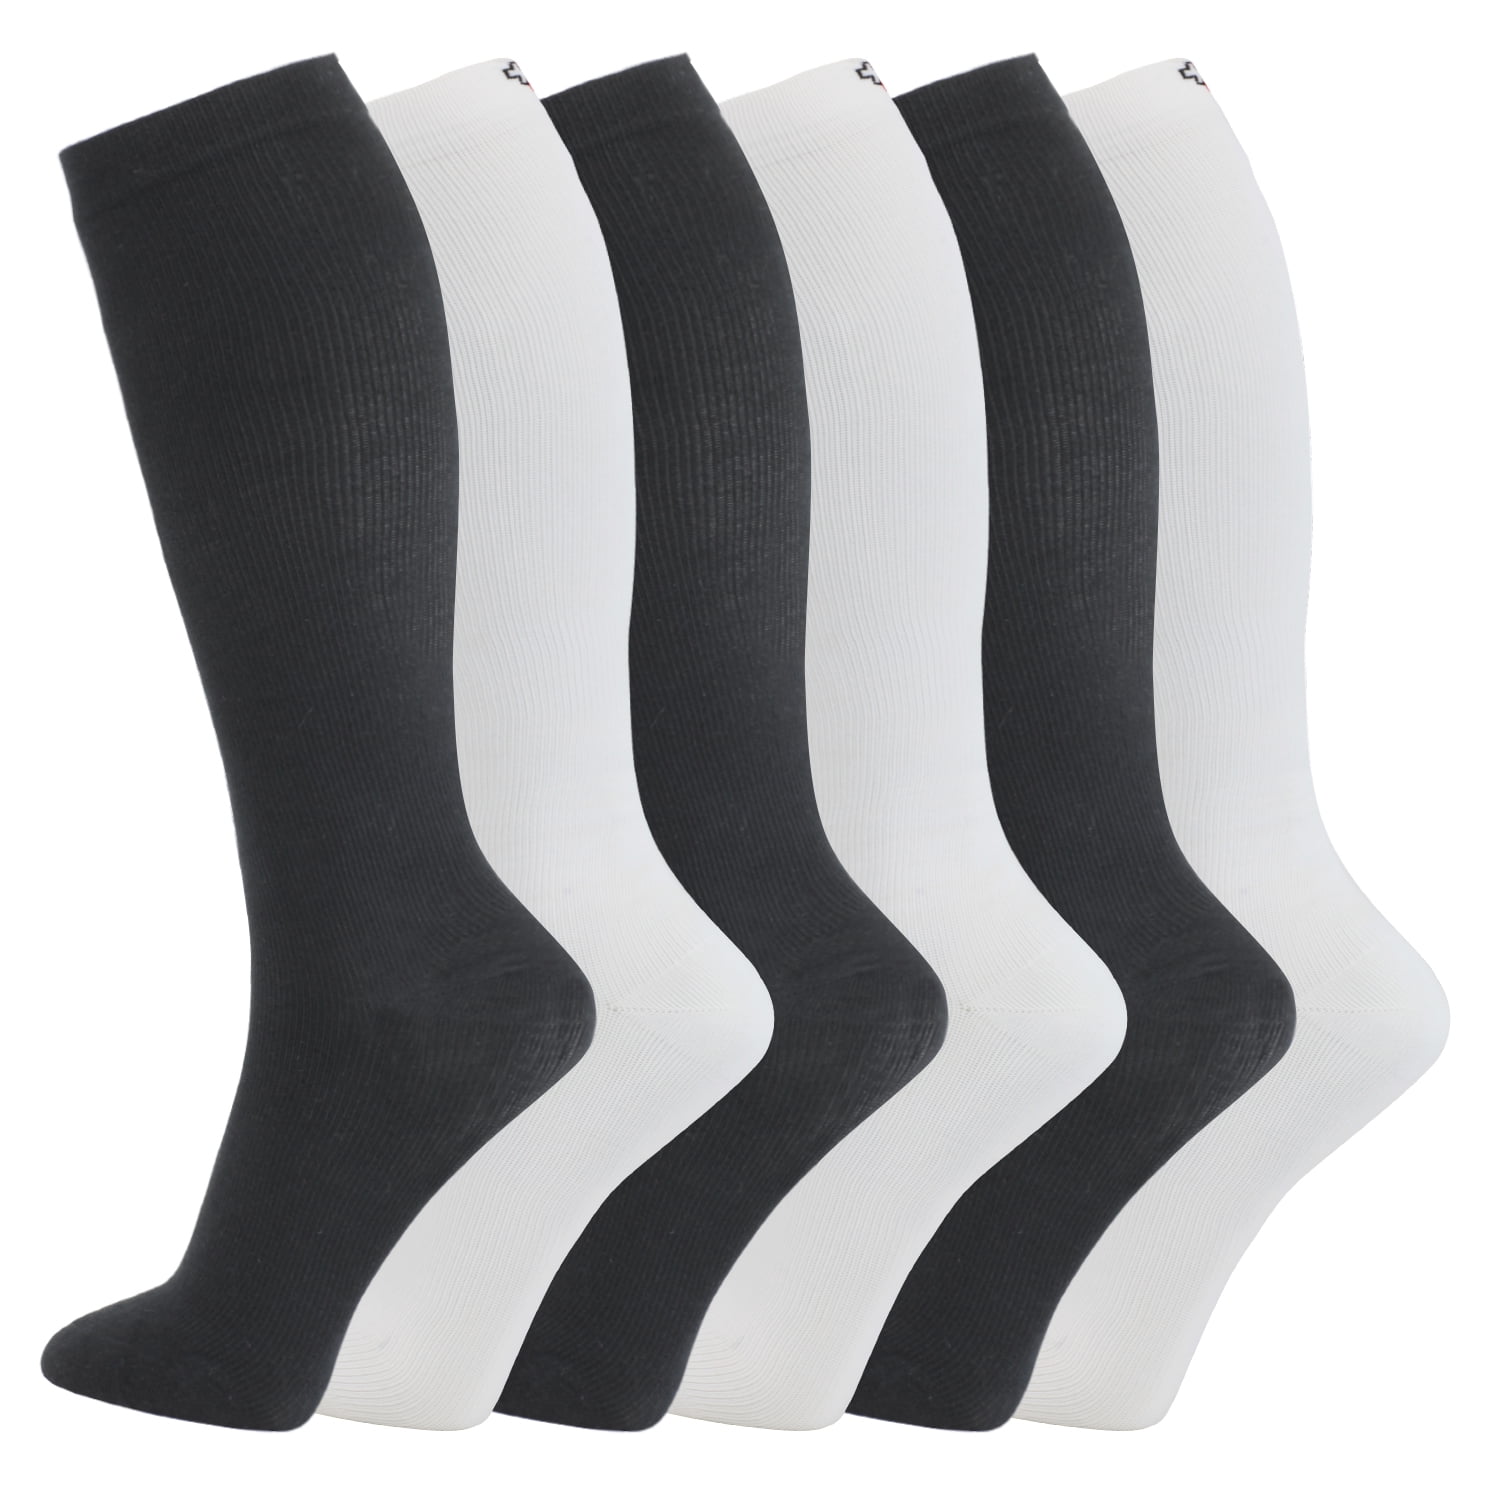 +MD Unisex Over-the-Calf Compression Socks Stockings 6 Pair - Walmart.com